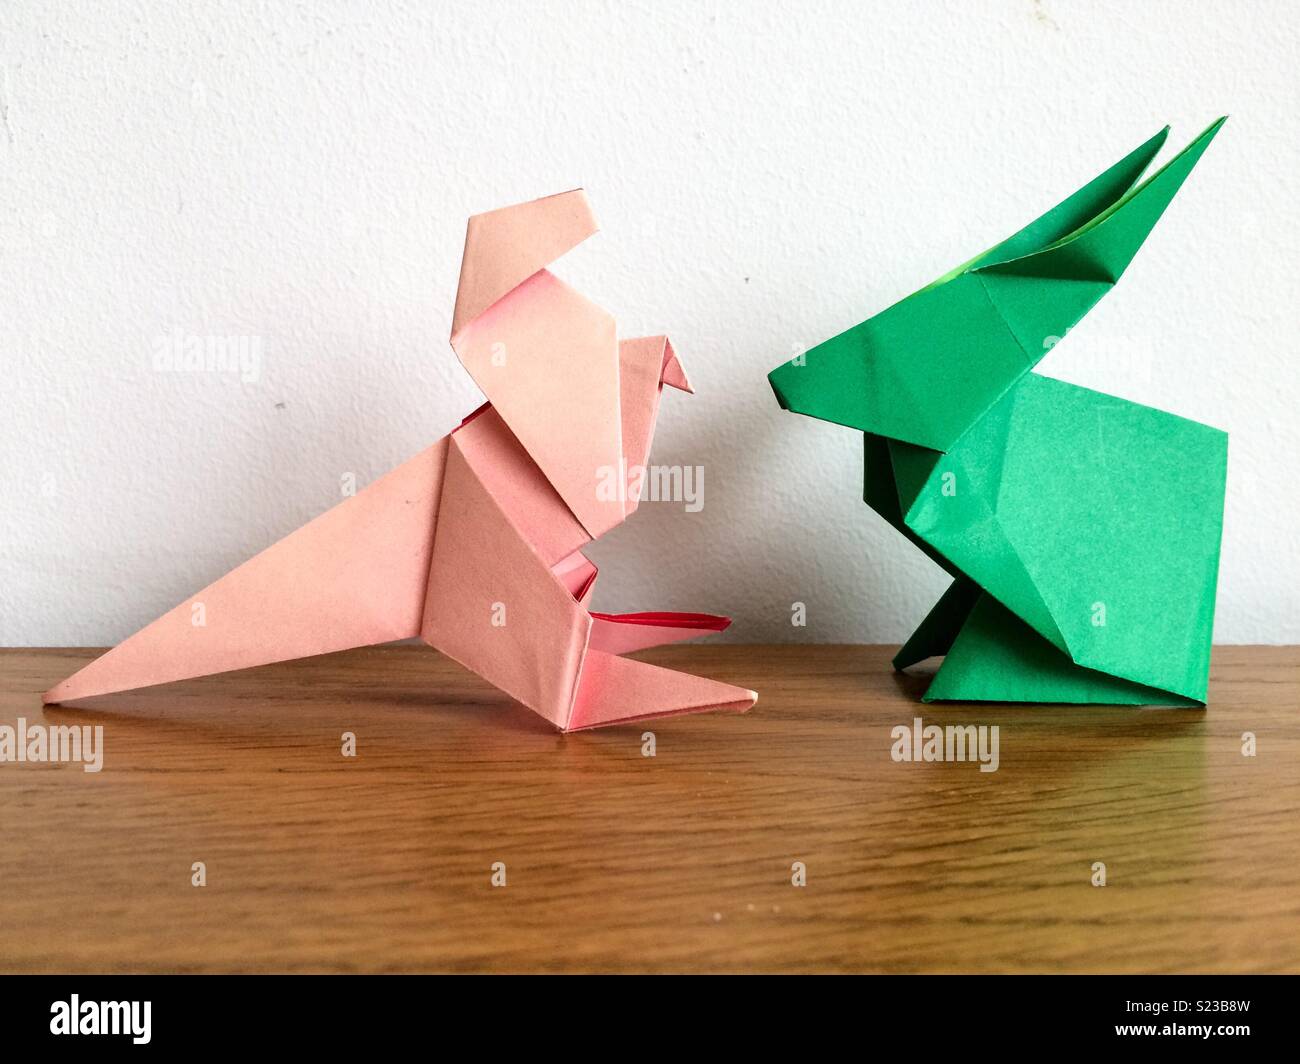 Origami face-off Stock Photo